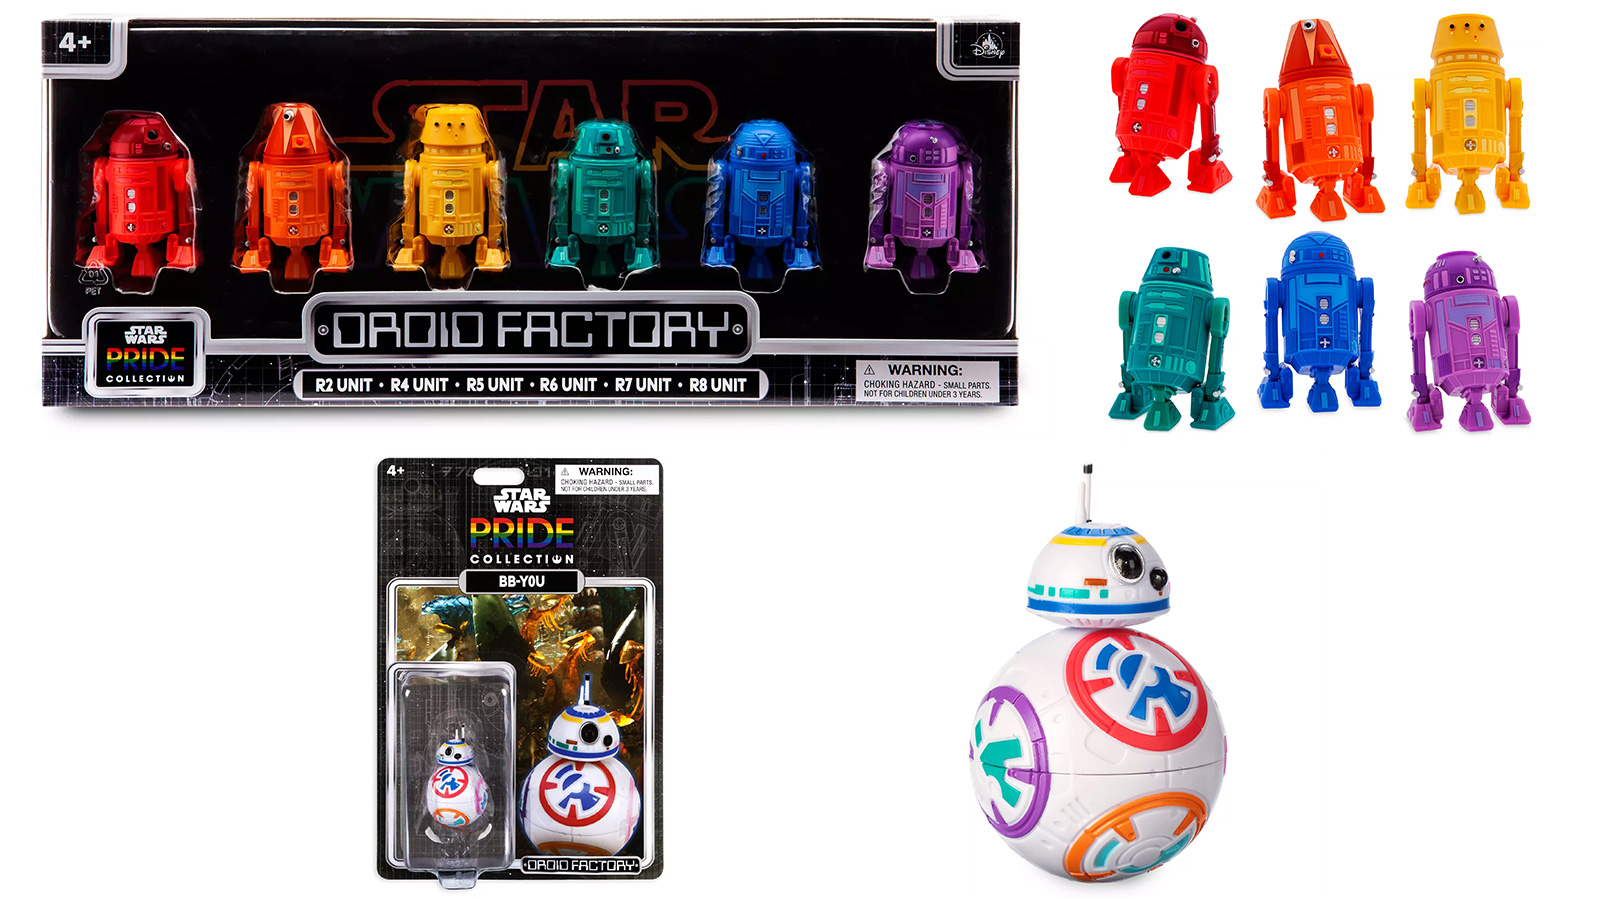 In Stock At Shop Disney - New Exclusive Droid Factory BB-Y0U & Droid Set